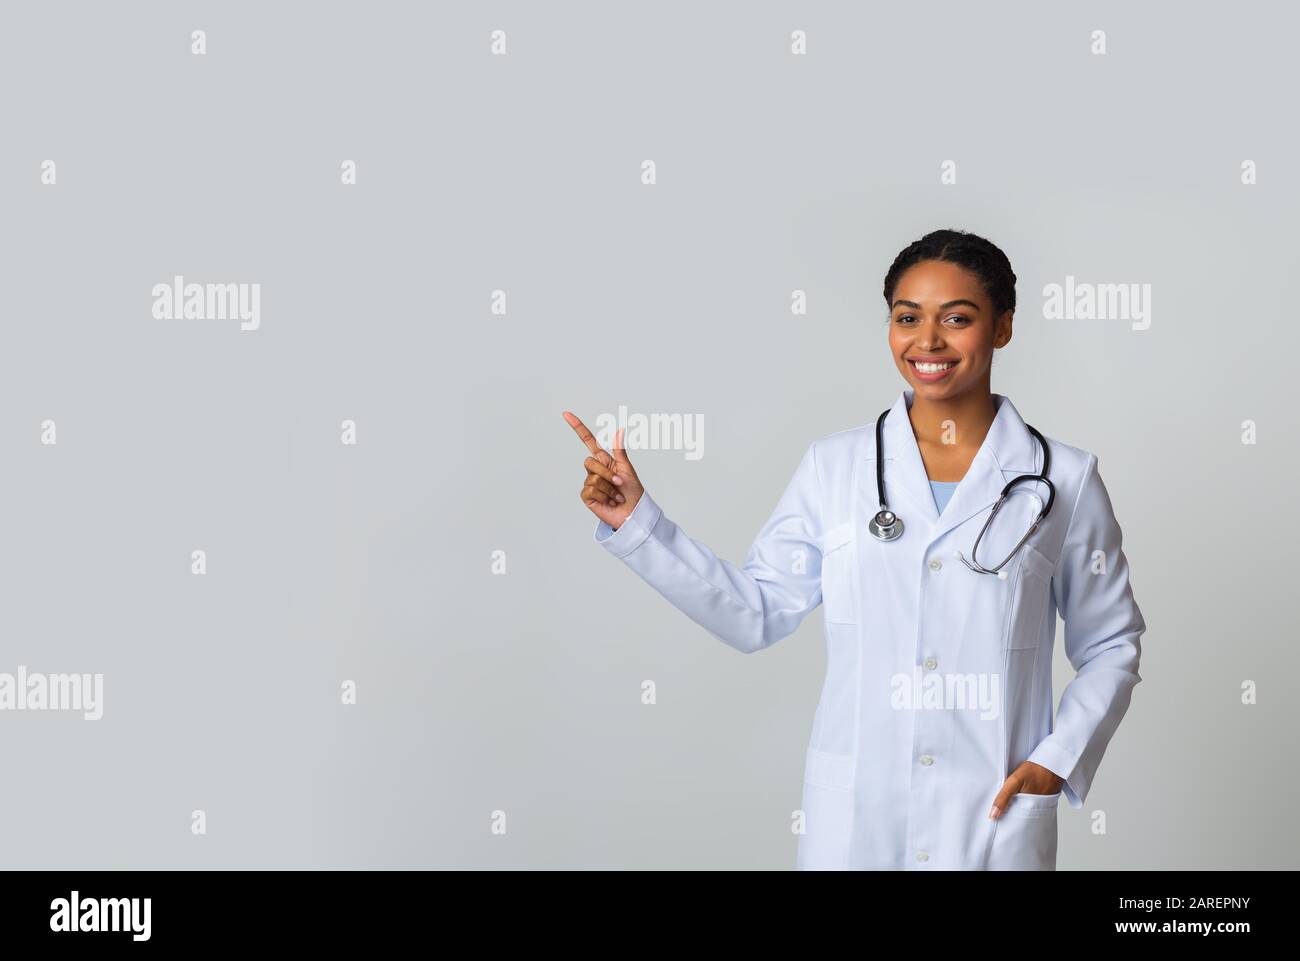 Young black female doctor pointing at copy space on light background Stock Photo